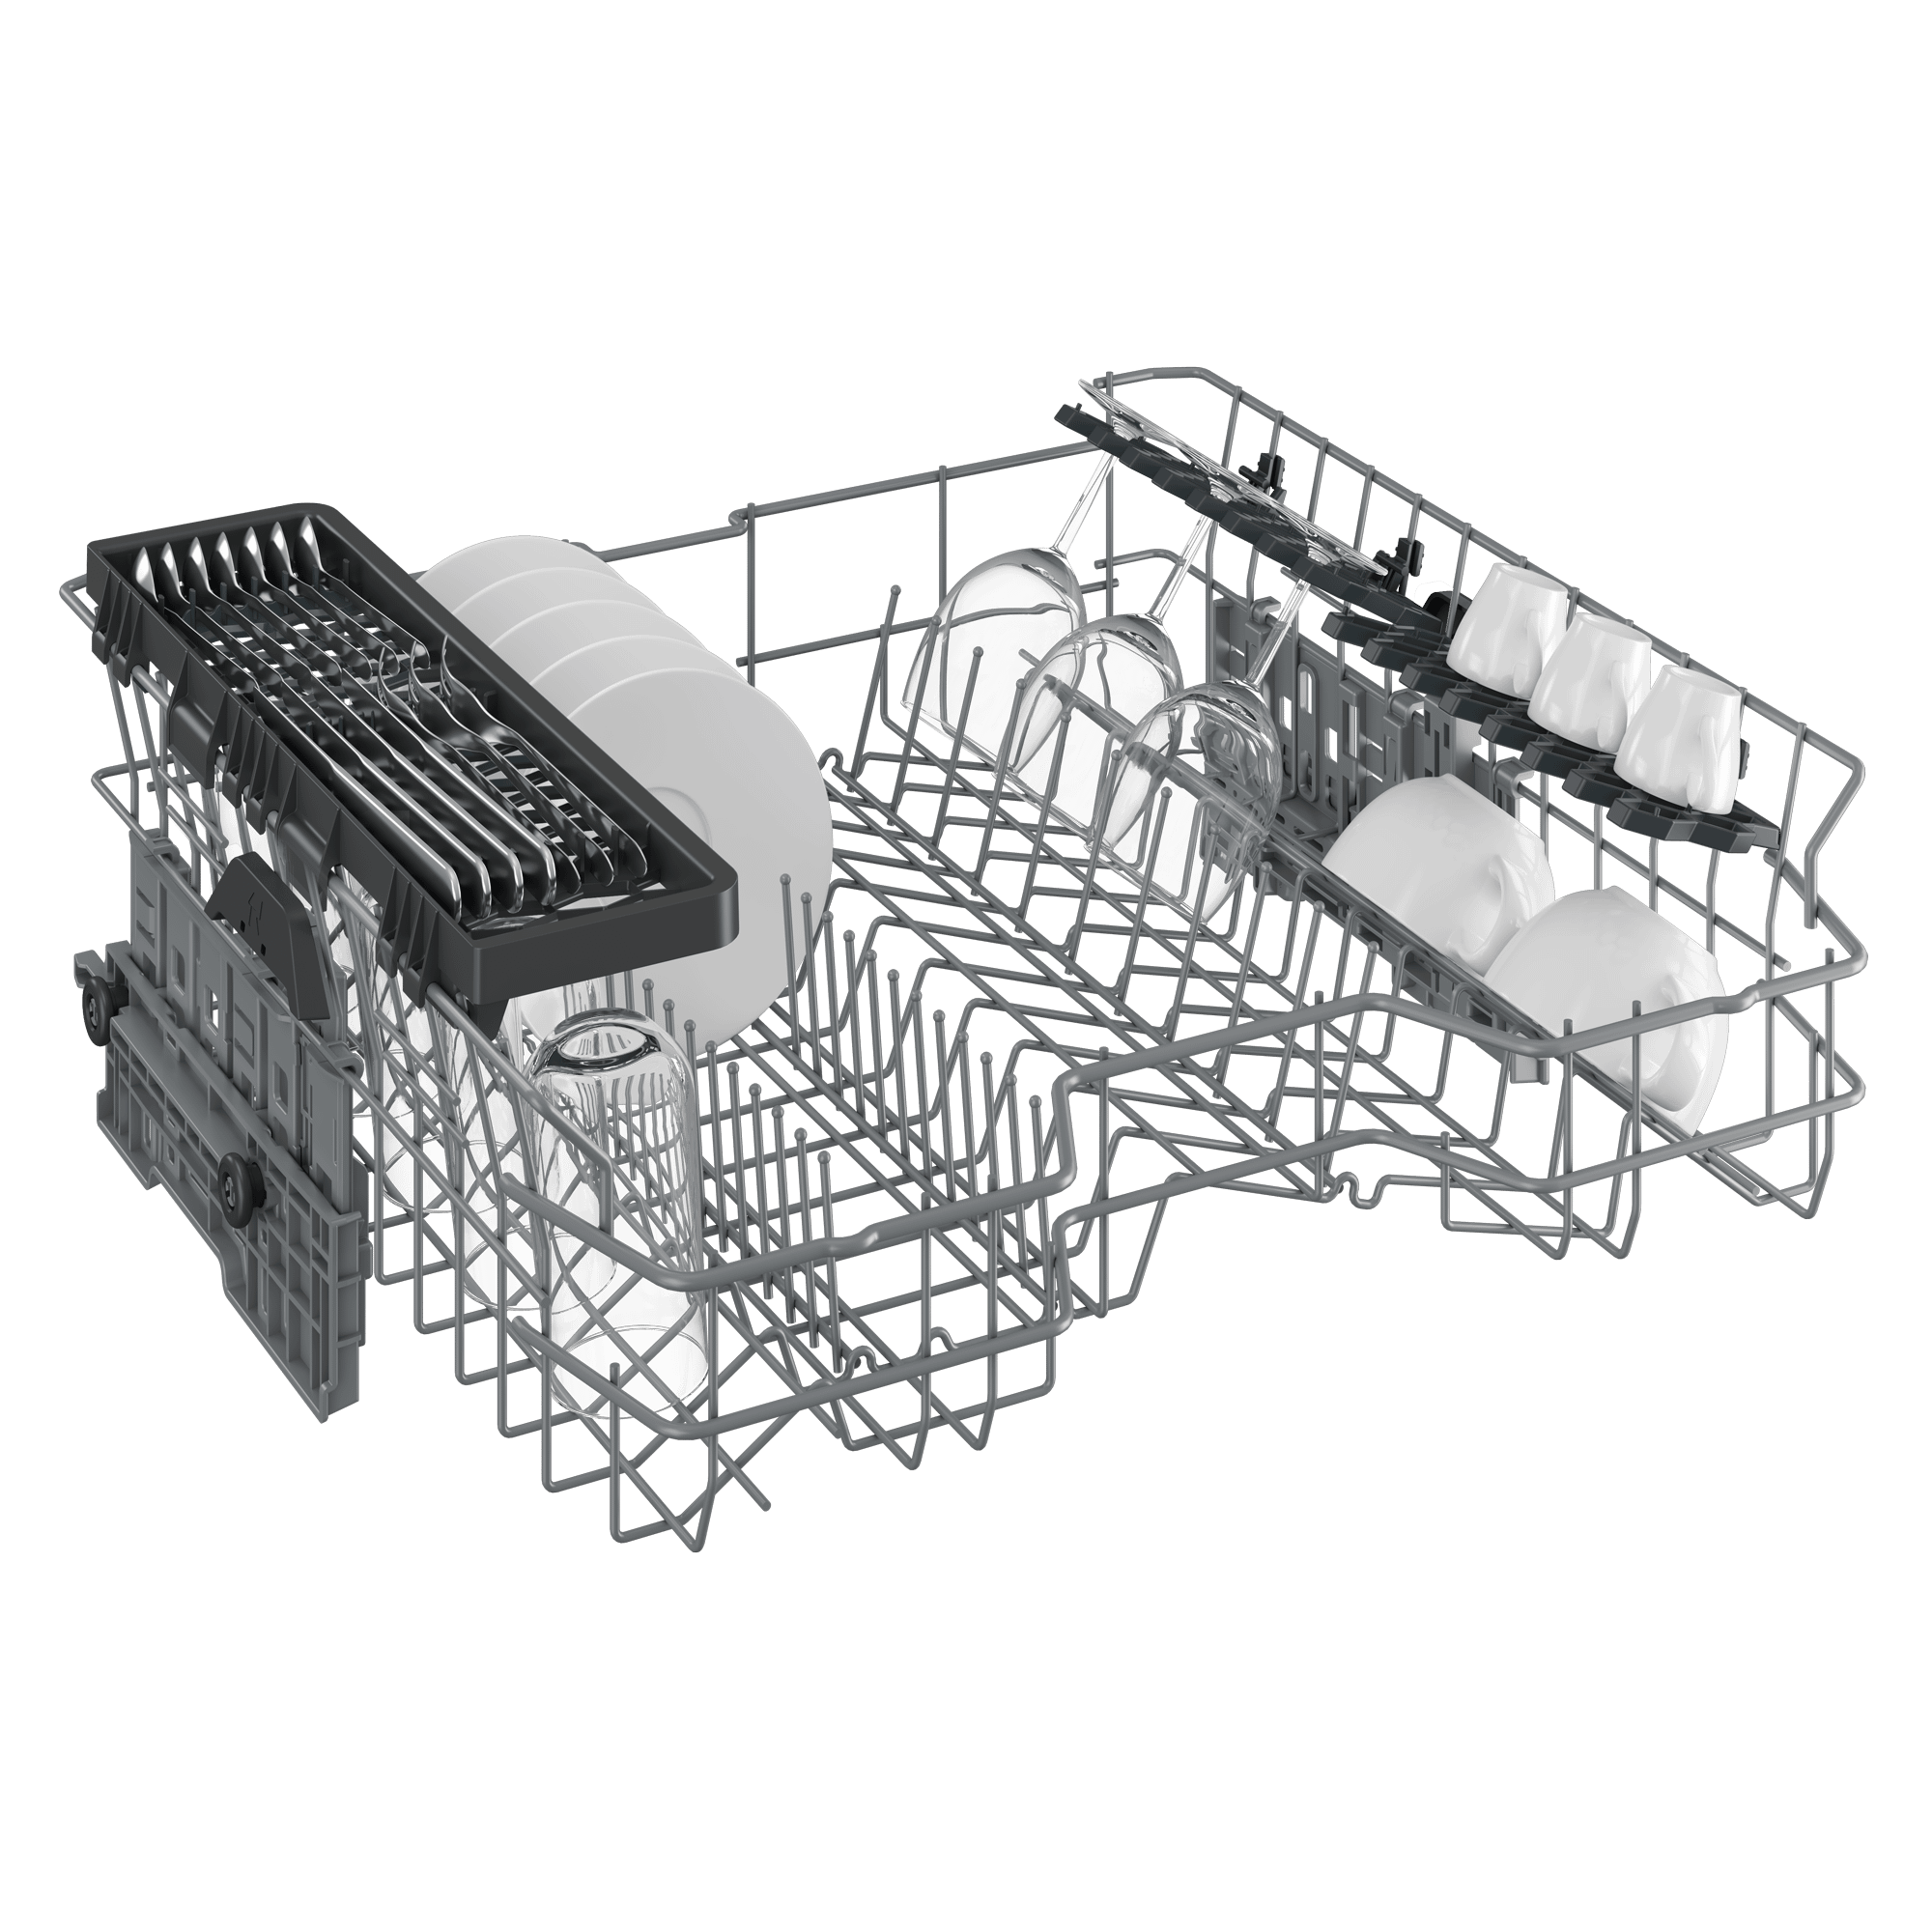 Beko Tall Tub Dishwasher, 14 place settings, 48 dBa, Fully Integrated Panel Ready